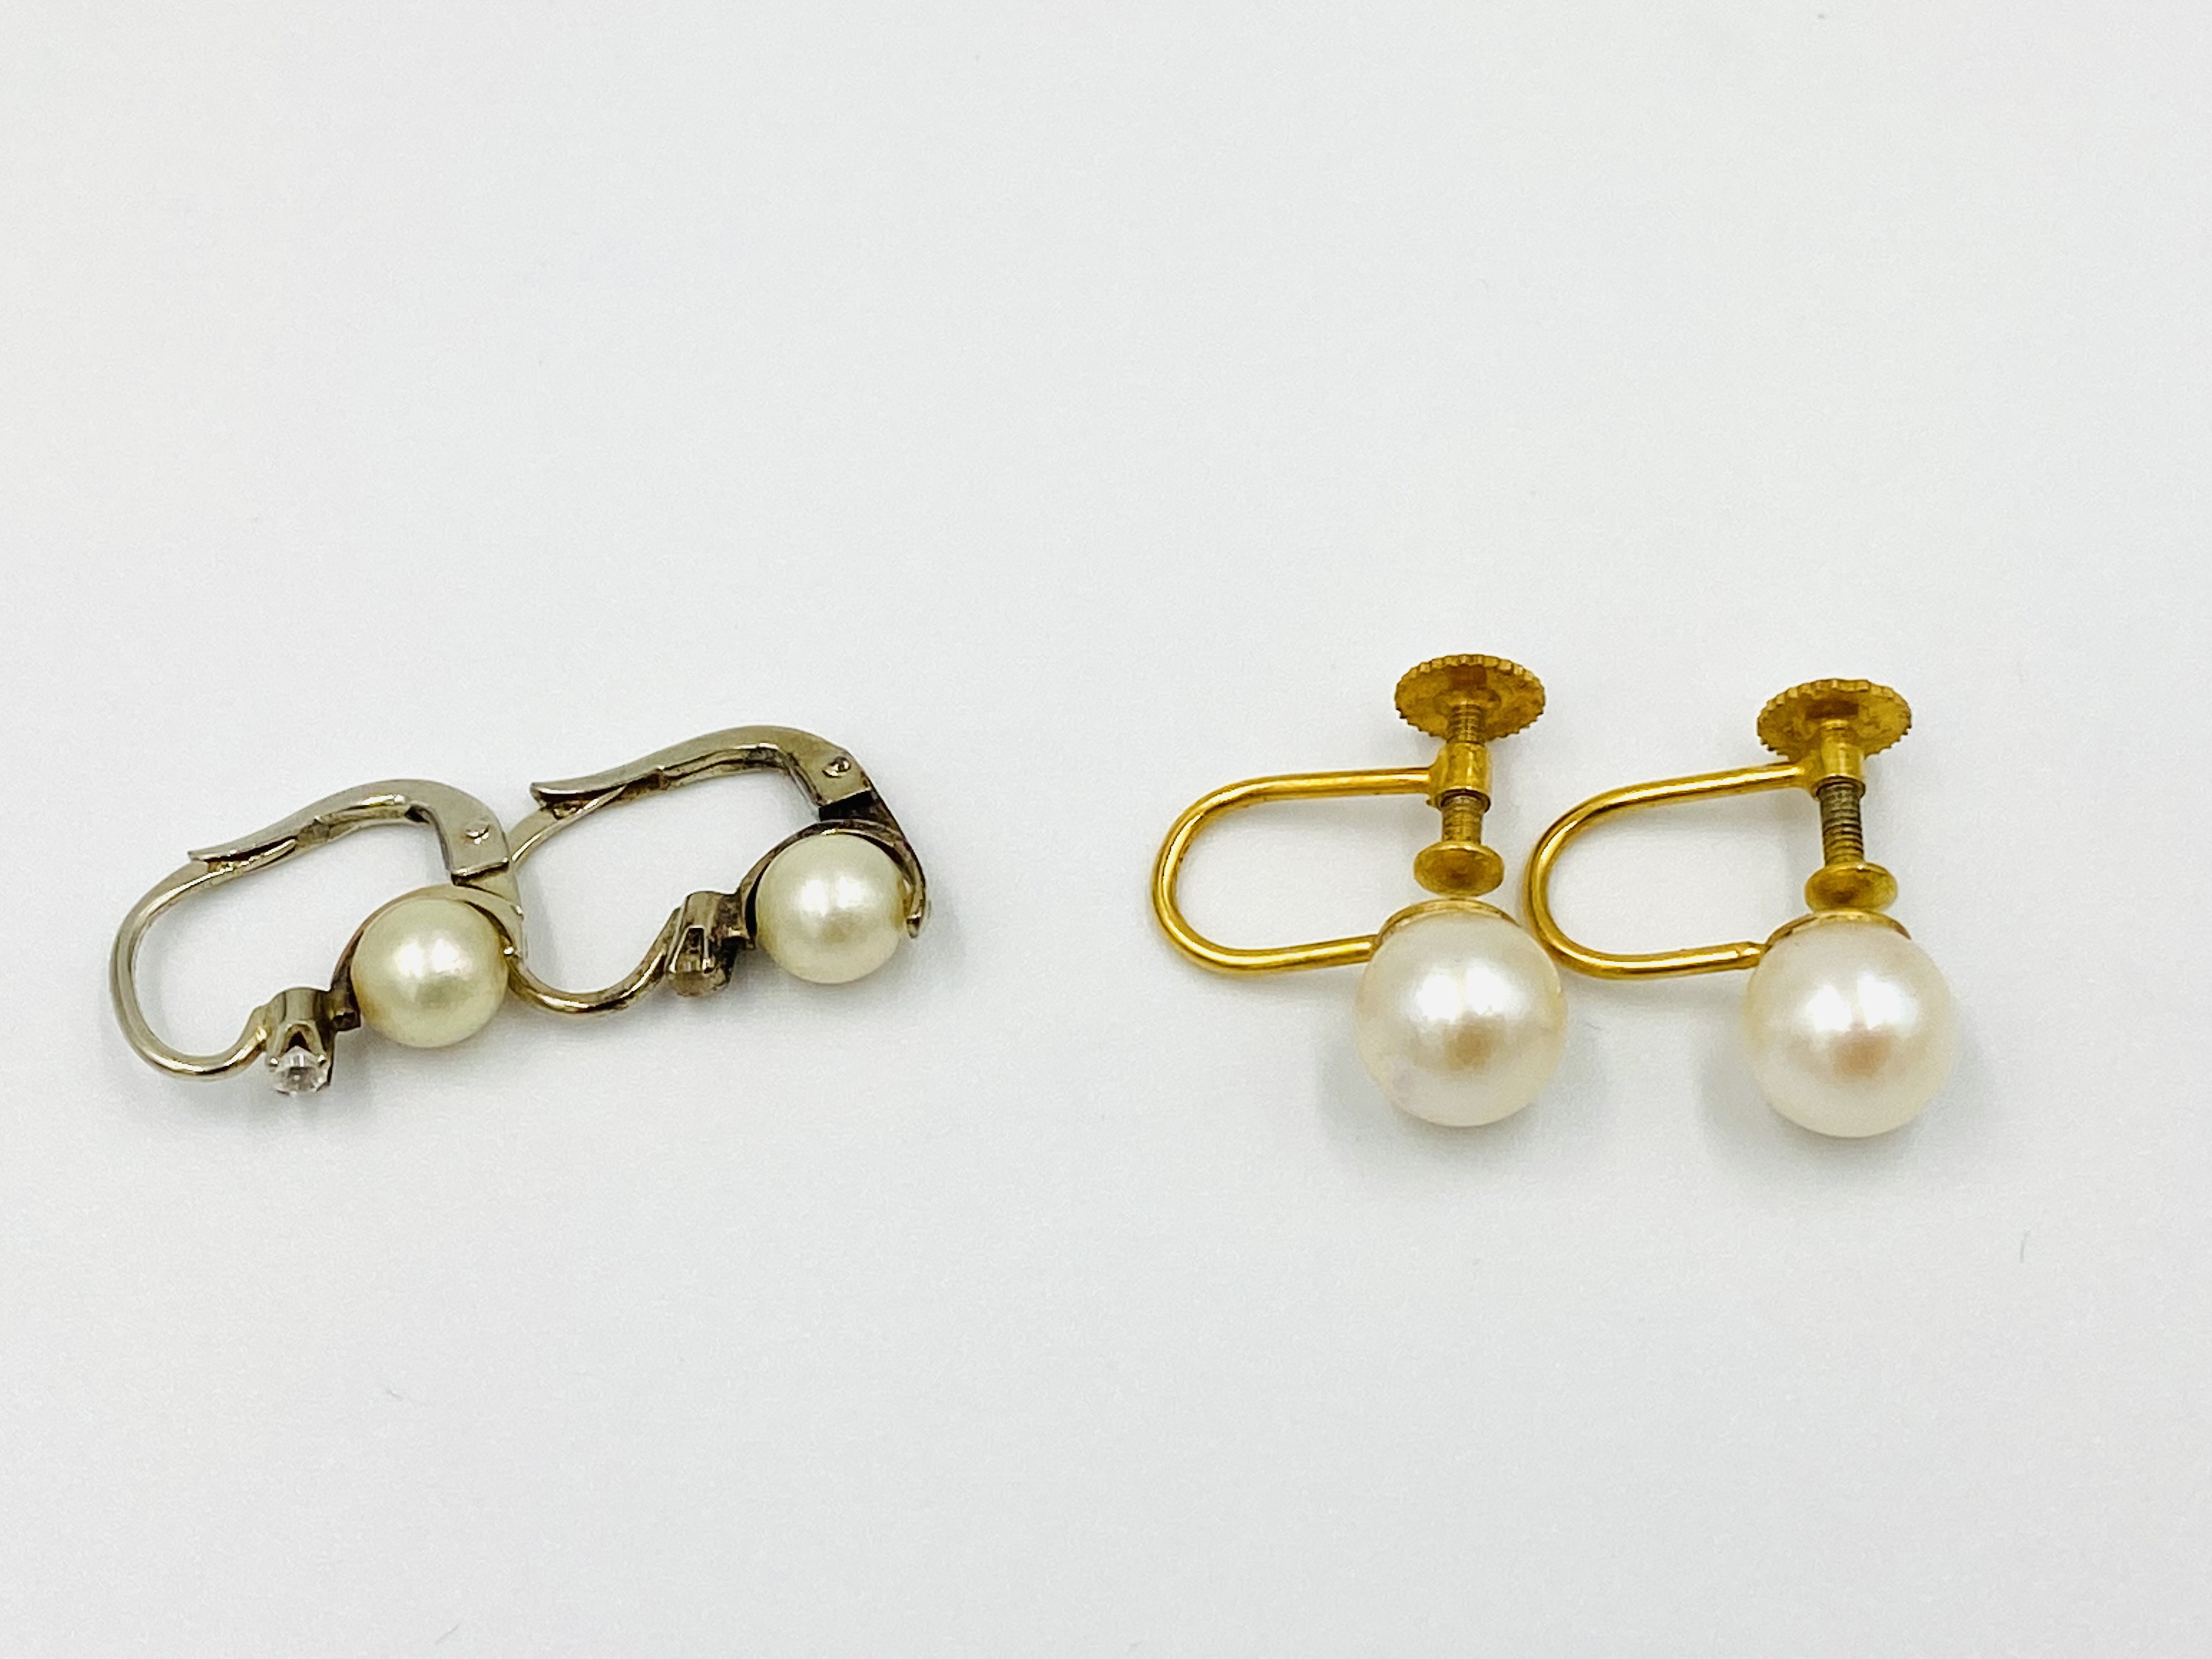 Pair of 9ct gold and pearl earrings; together a pair of white metal and pearl earrings. - Image 4 of 4